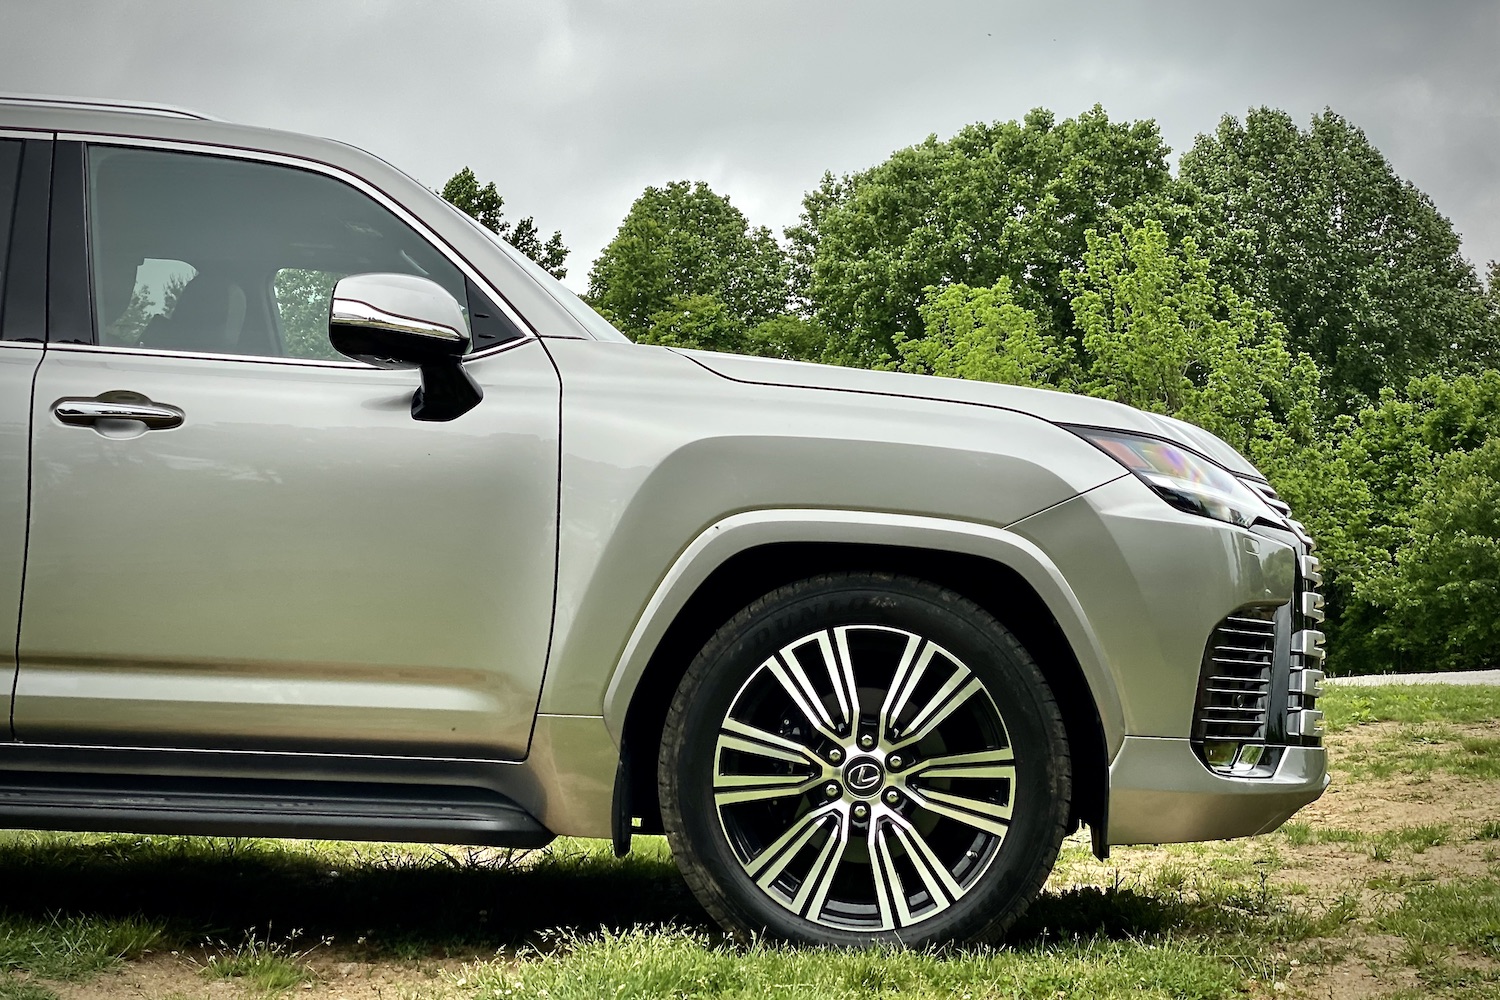 Side profile view of the 2022 Lexus LX 600 front end from the passenger's side in a grassy field.